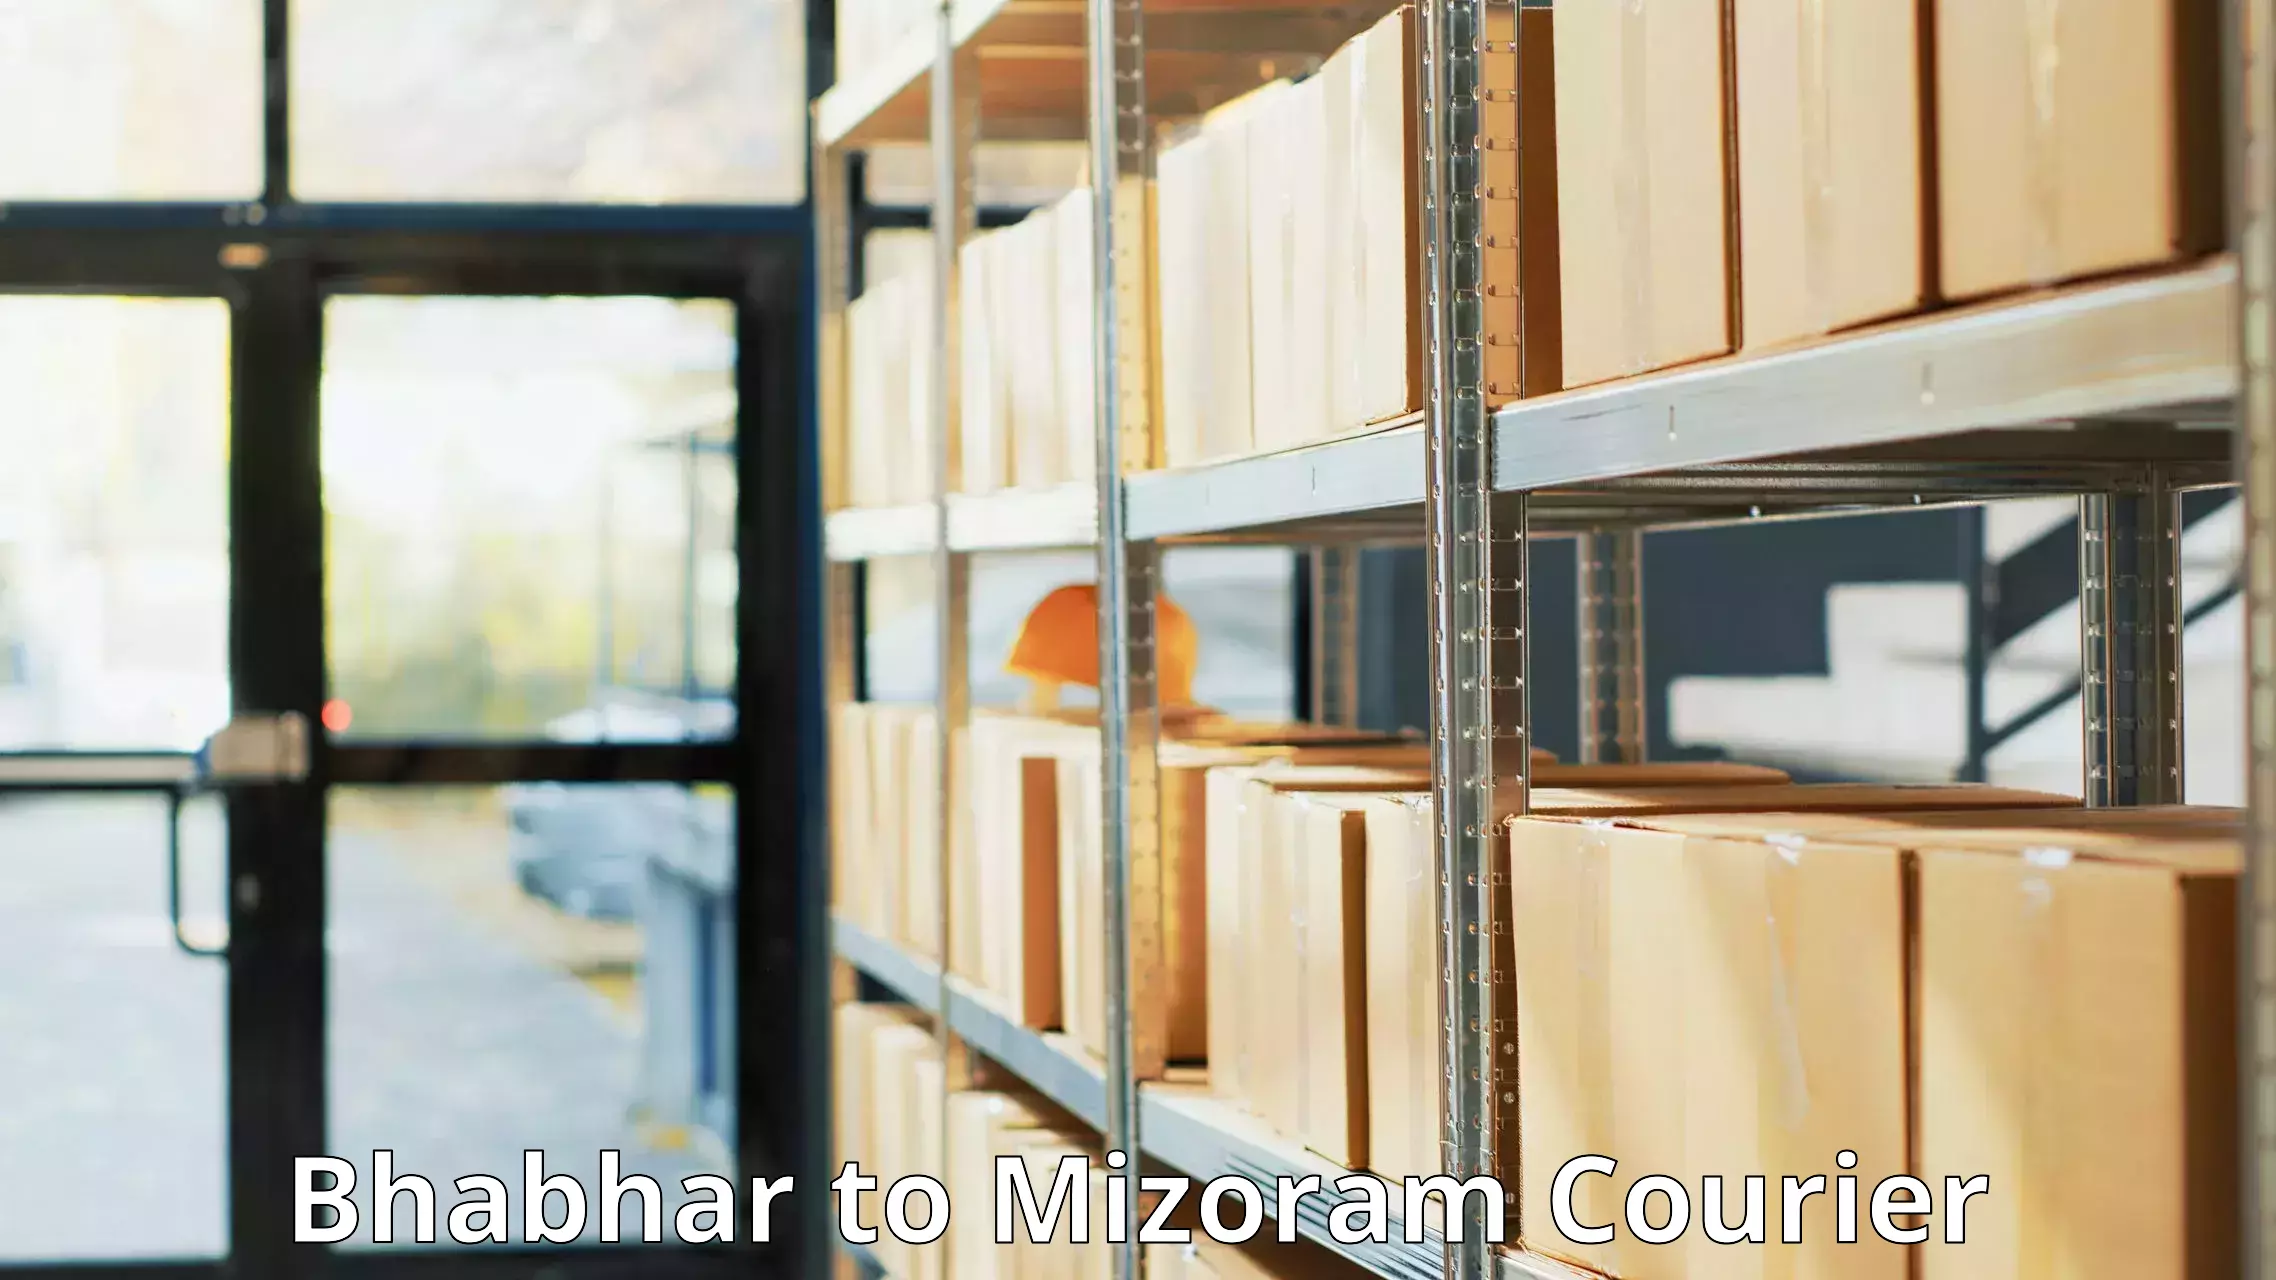 Parcel service for businesses in Bhabhar to Mizoram